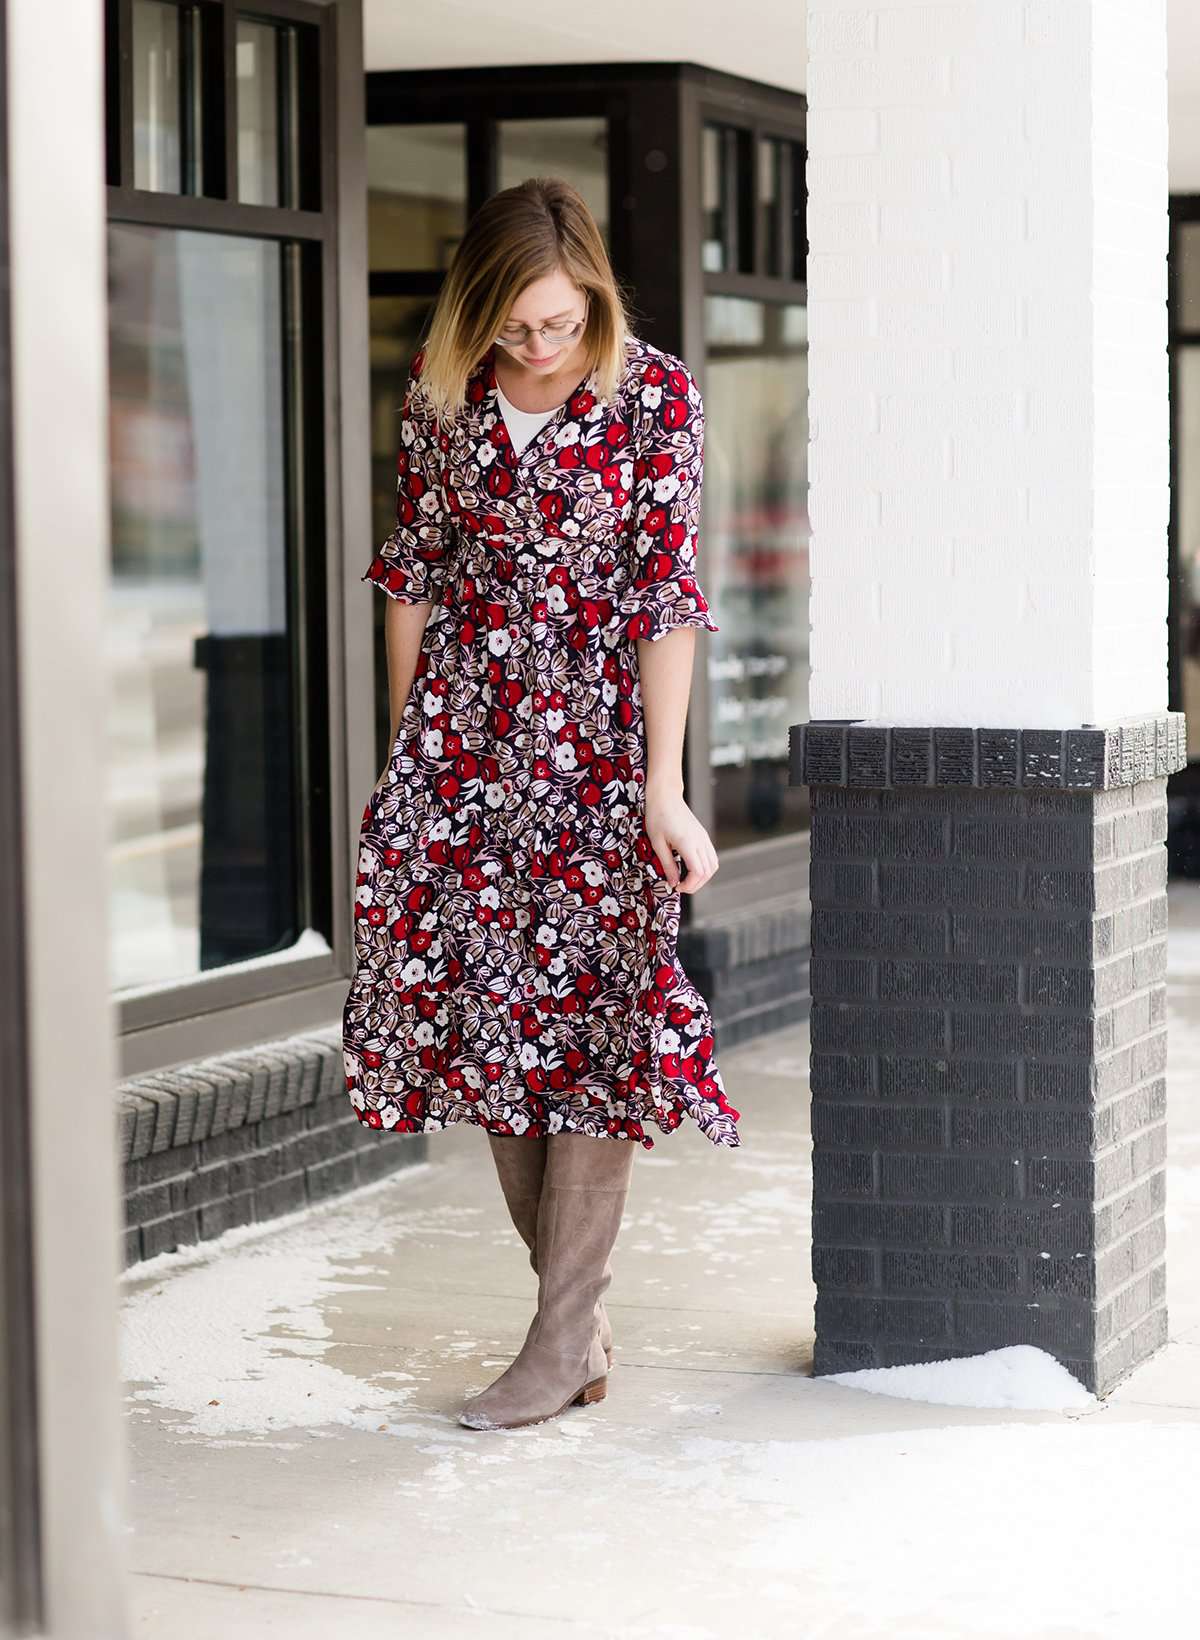 Woman wearing a midi length modest dress. This dress is a holiday red with poppy flowers and white flowers on it. It has a v-neck and ruffle 3/4 sleeves. This dress is paired with tall suede riding boots.